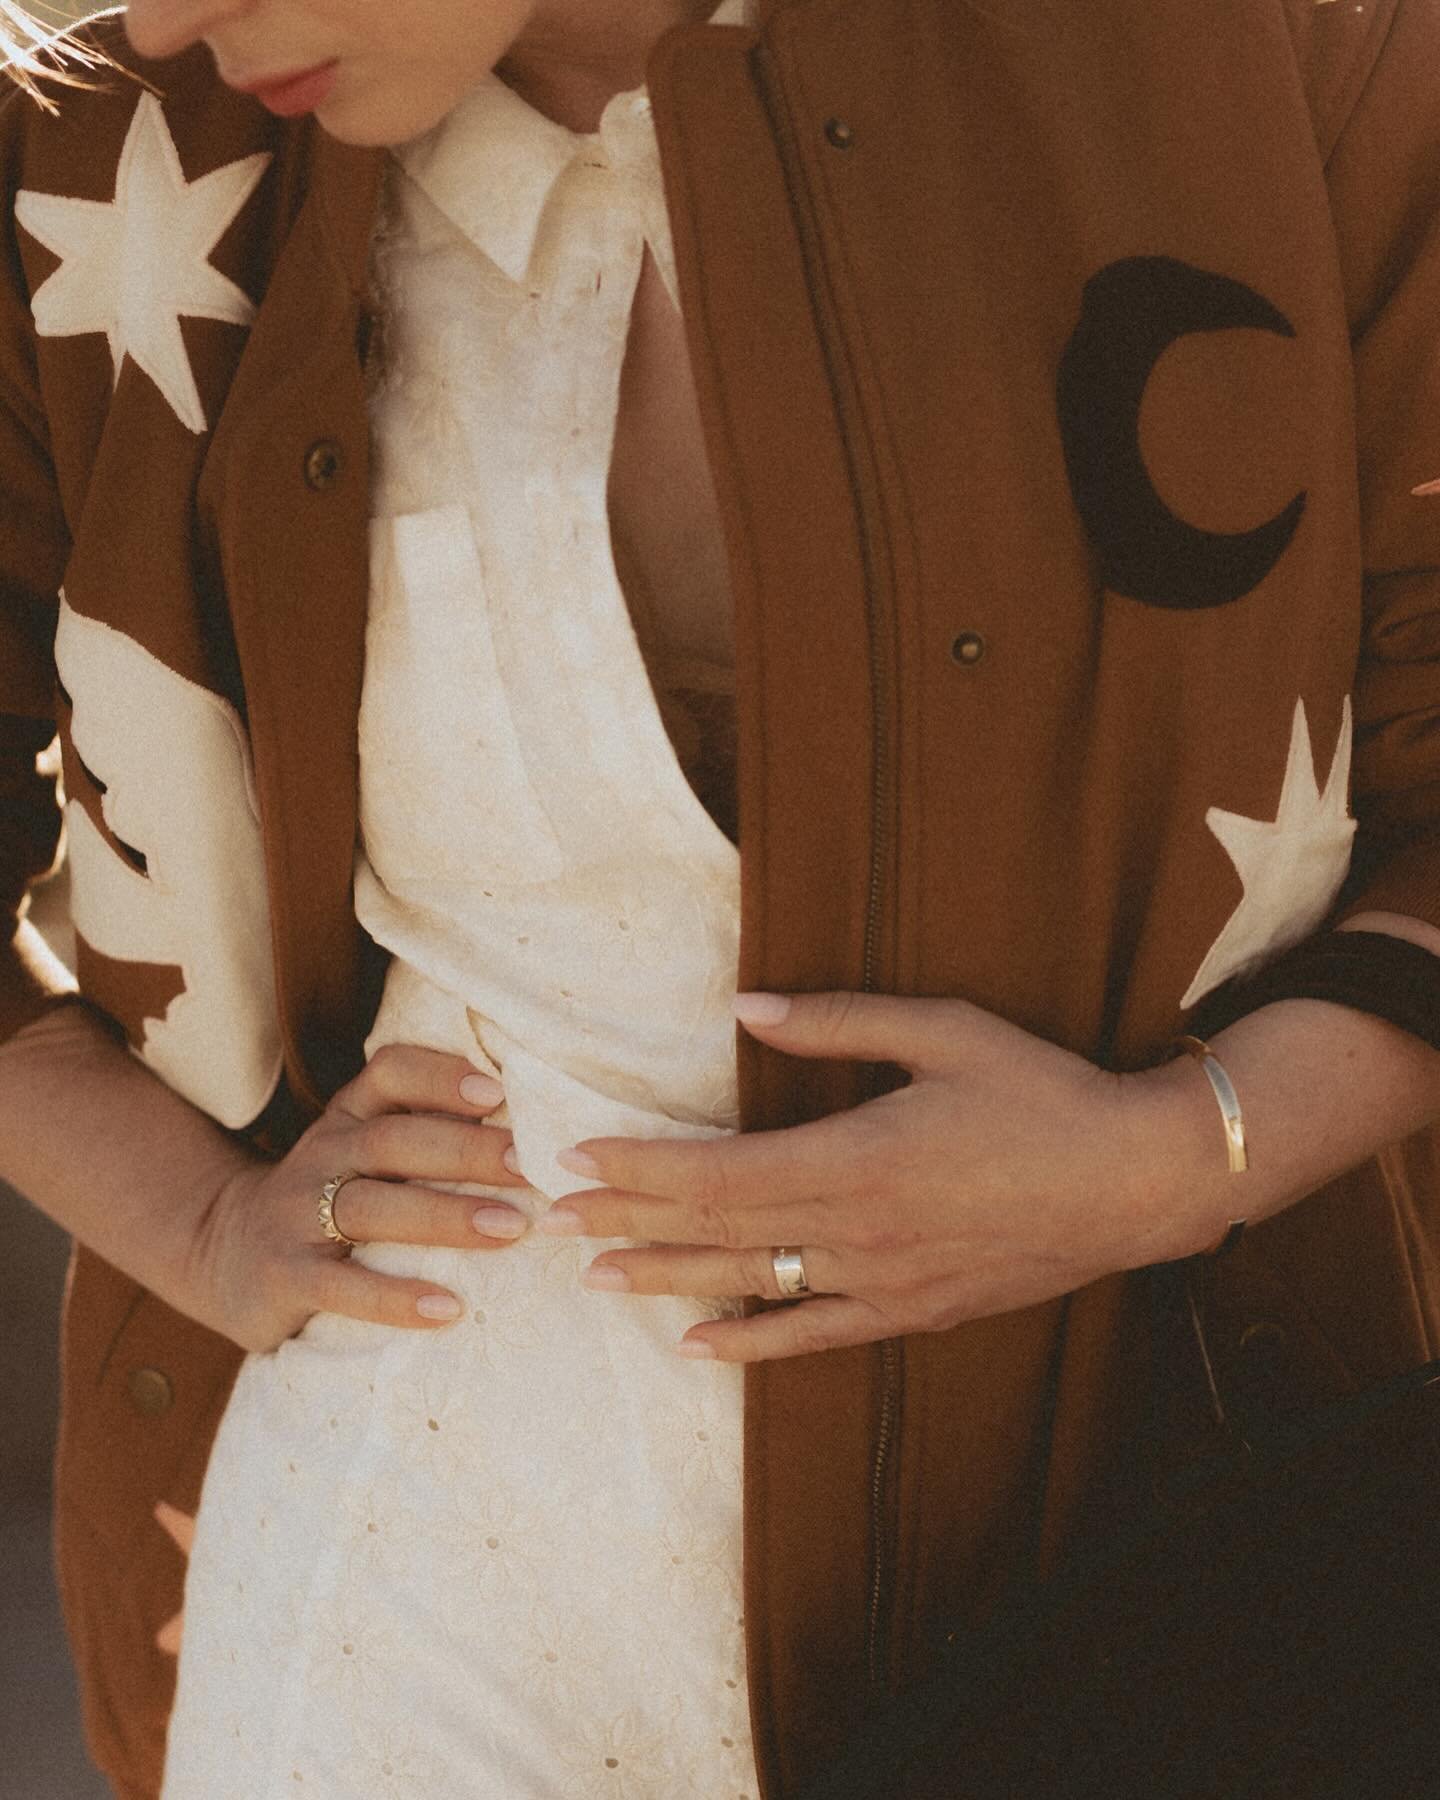 April has been a whirl of events &amp; emotions. 
1. I call this sun, star and bird jacket by @sezane &amp; @pangeaaaa  The Wizard&rsquo;s jacket because it manages to put a smile on my face when I need it most. It&rsquo;s almost always sold out but 